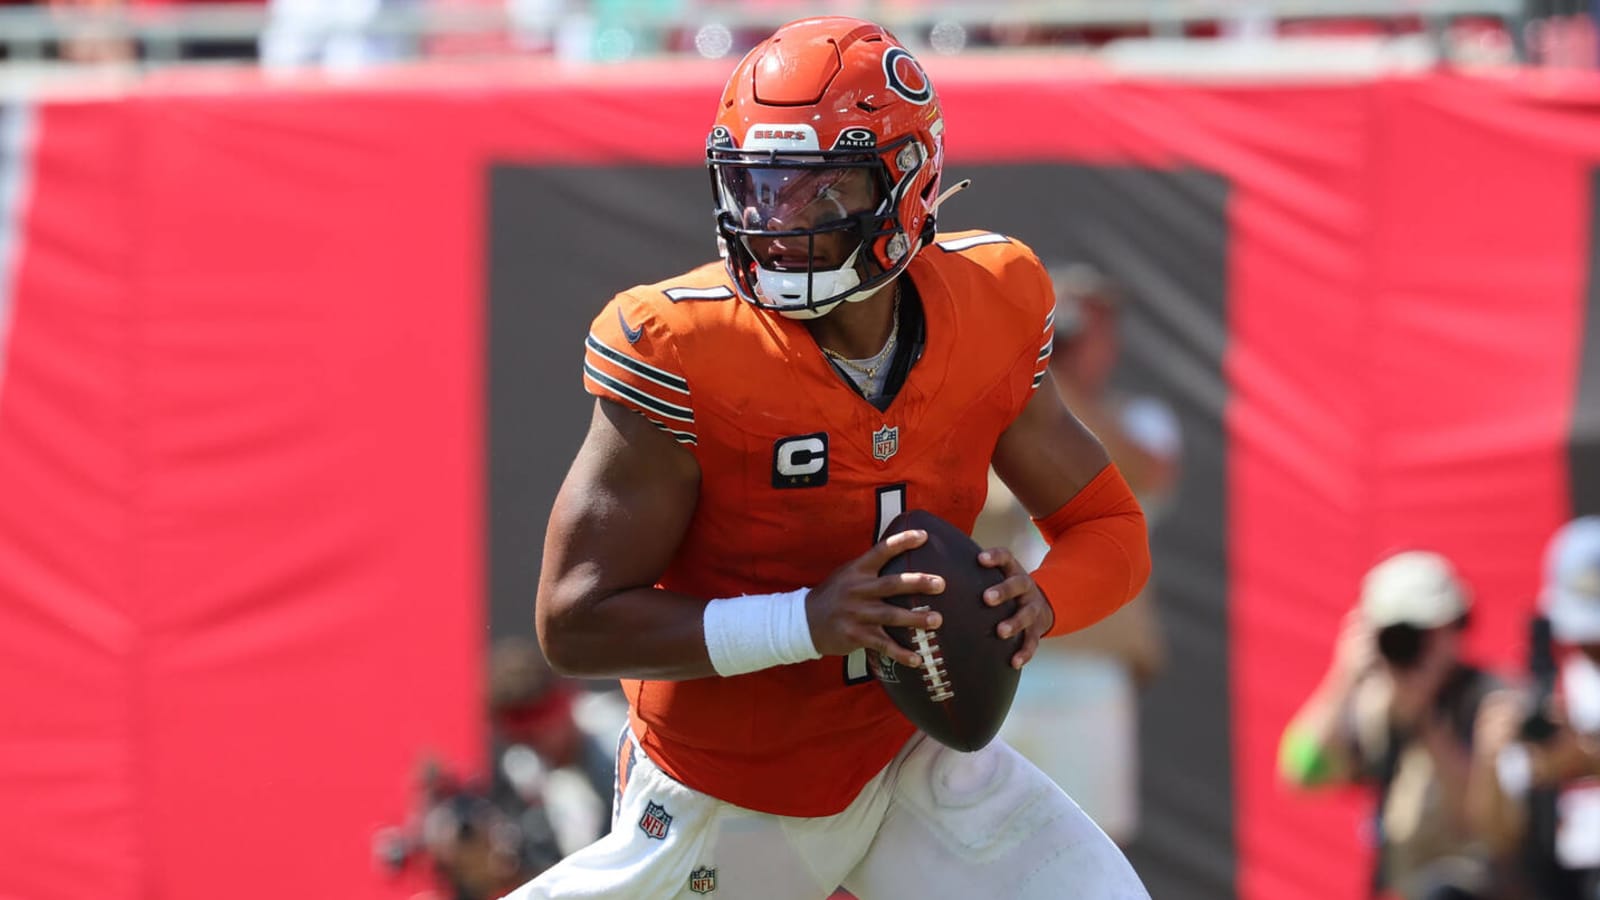 Bears QB Justin Fields made absolutely brutal play on sack